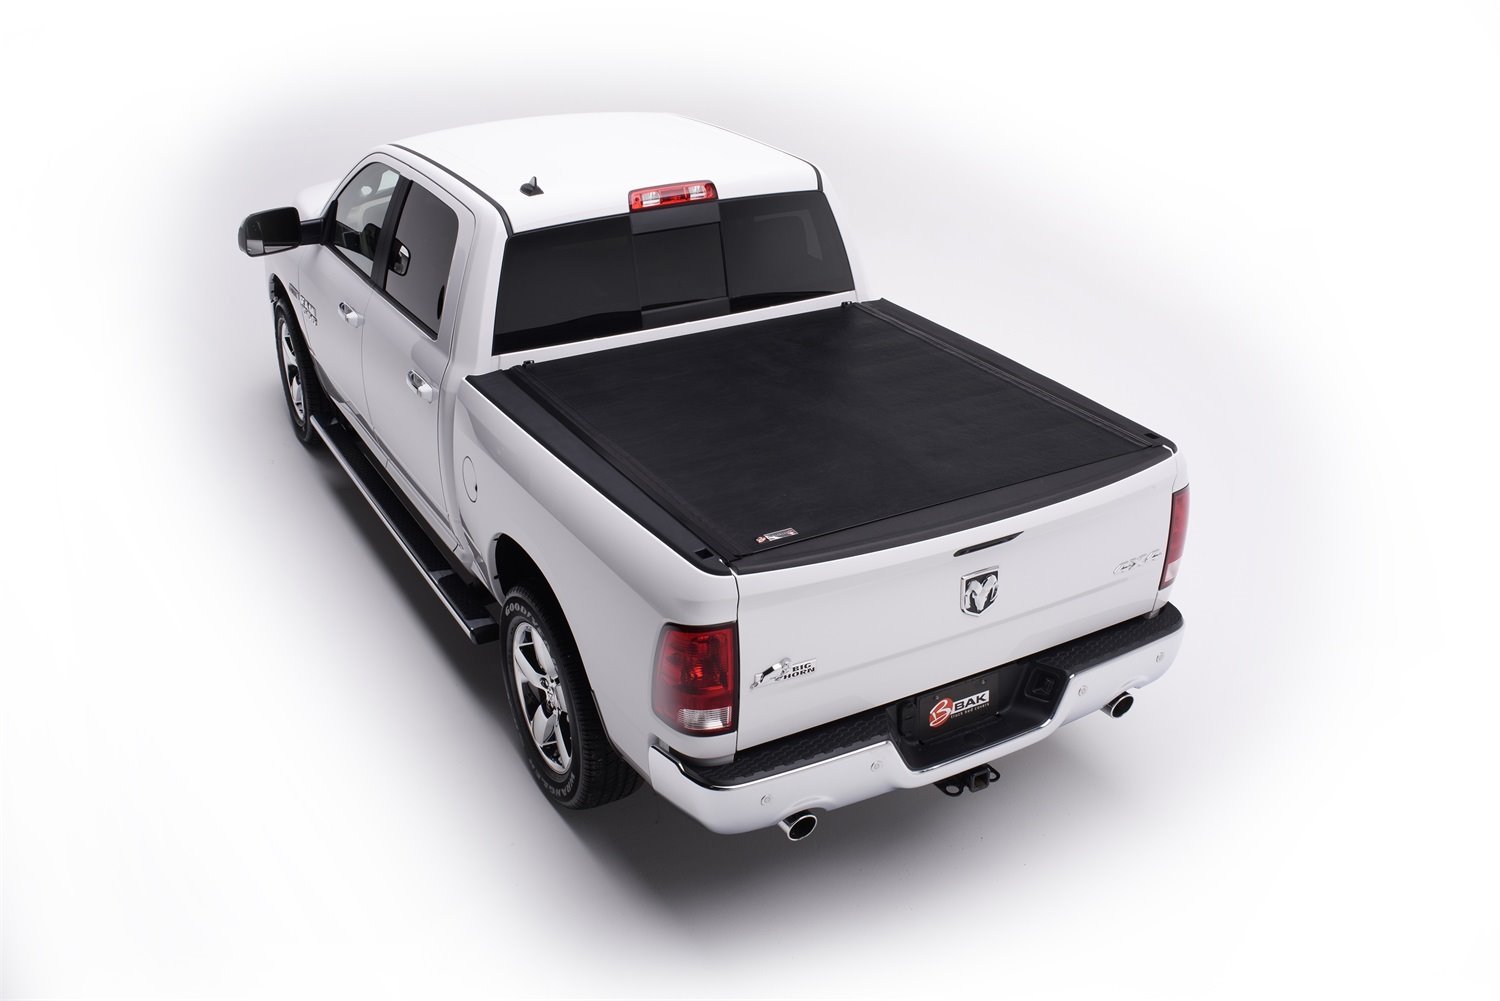 39203 Revolver X2 for 02-08 Dodge Ram 6.4 ft. Bed, Roll-Up Hard Cover Style [Black Finish]